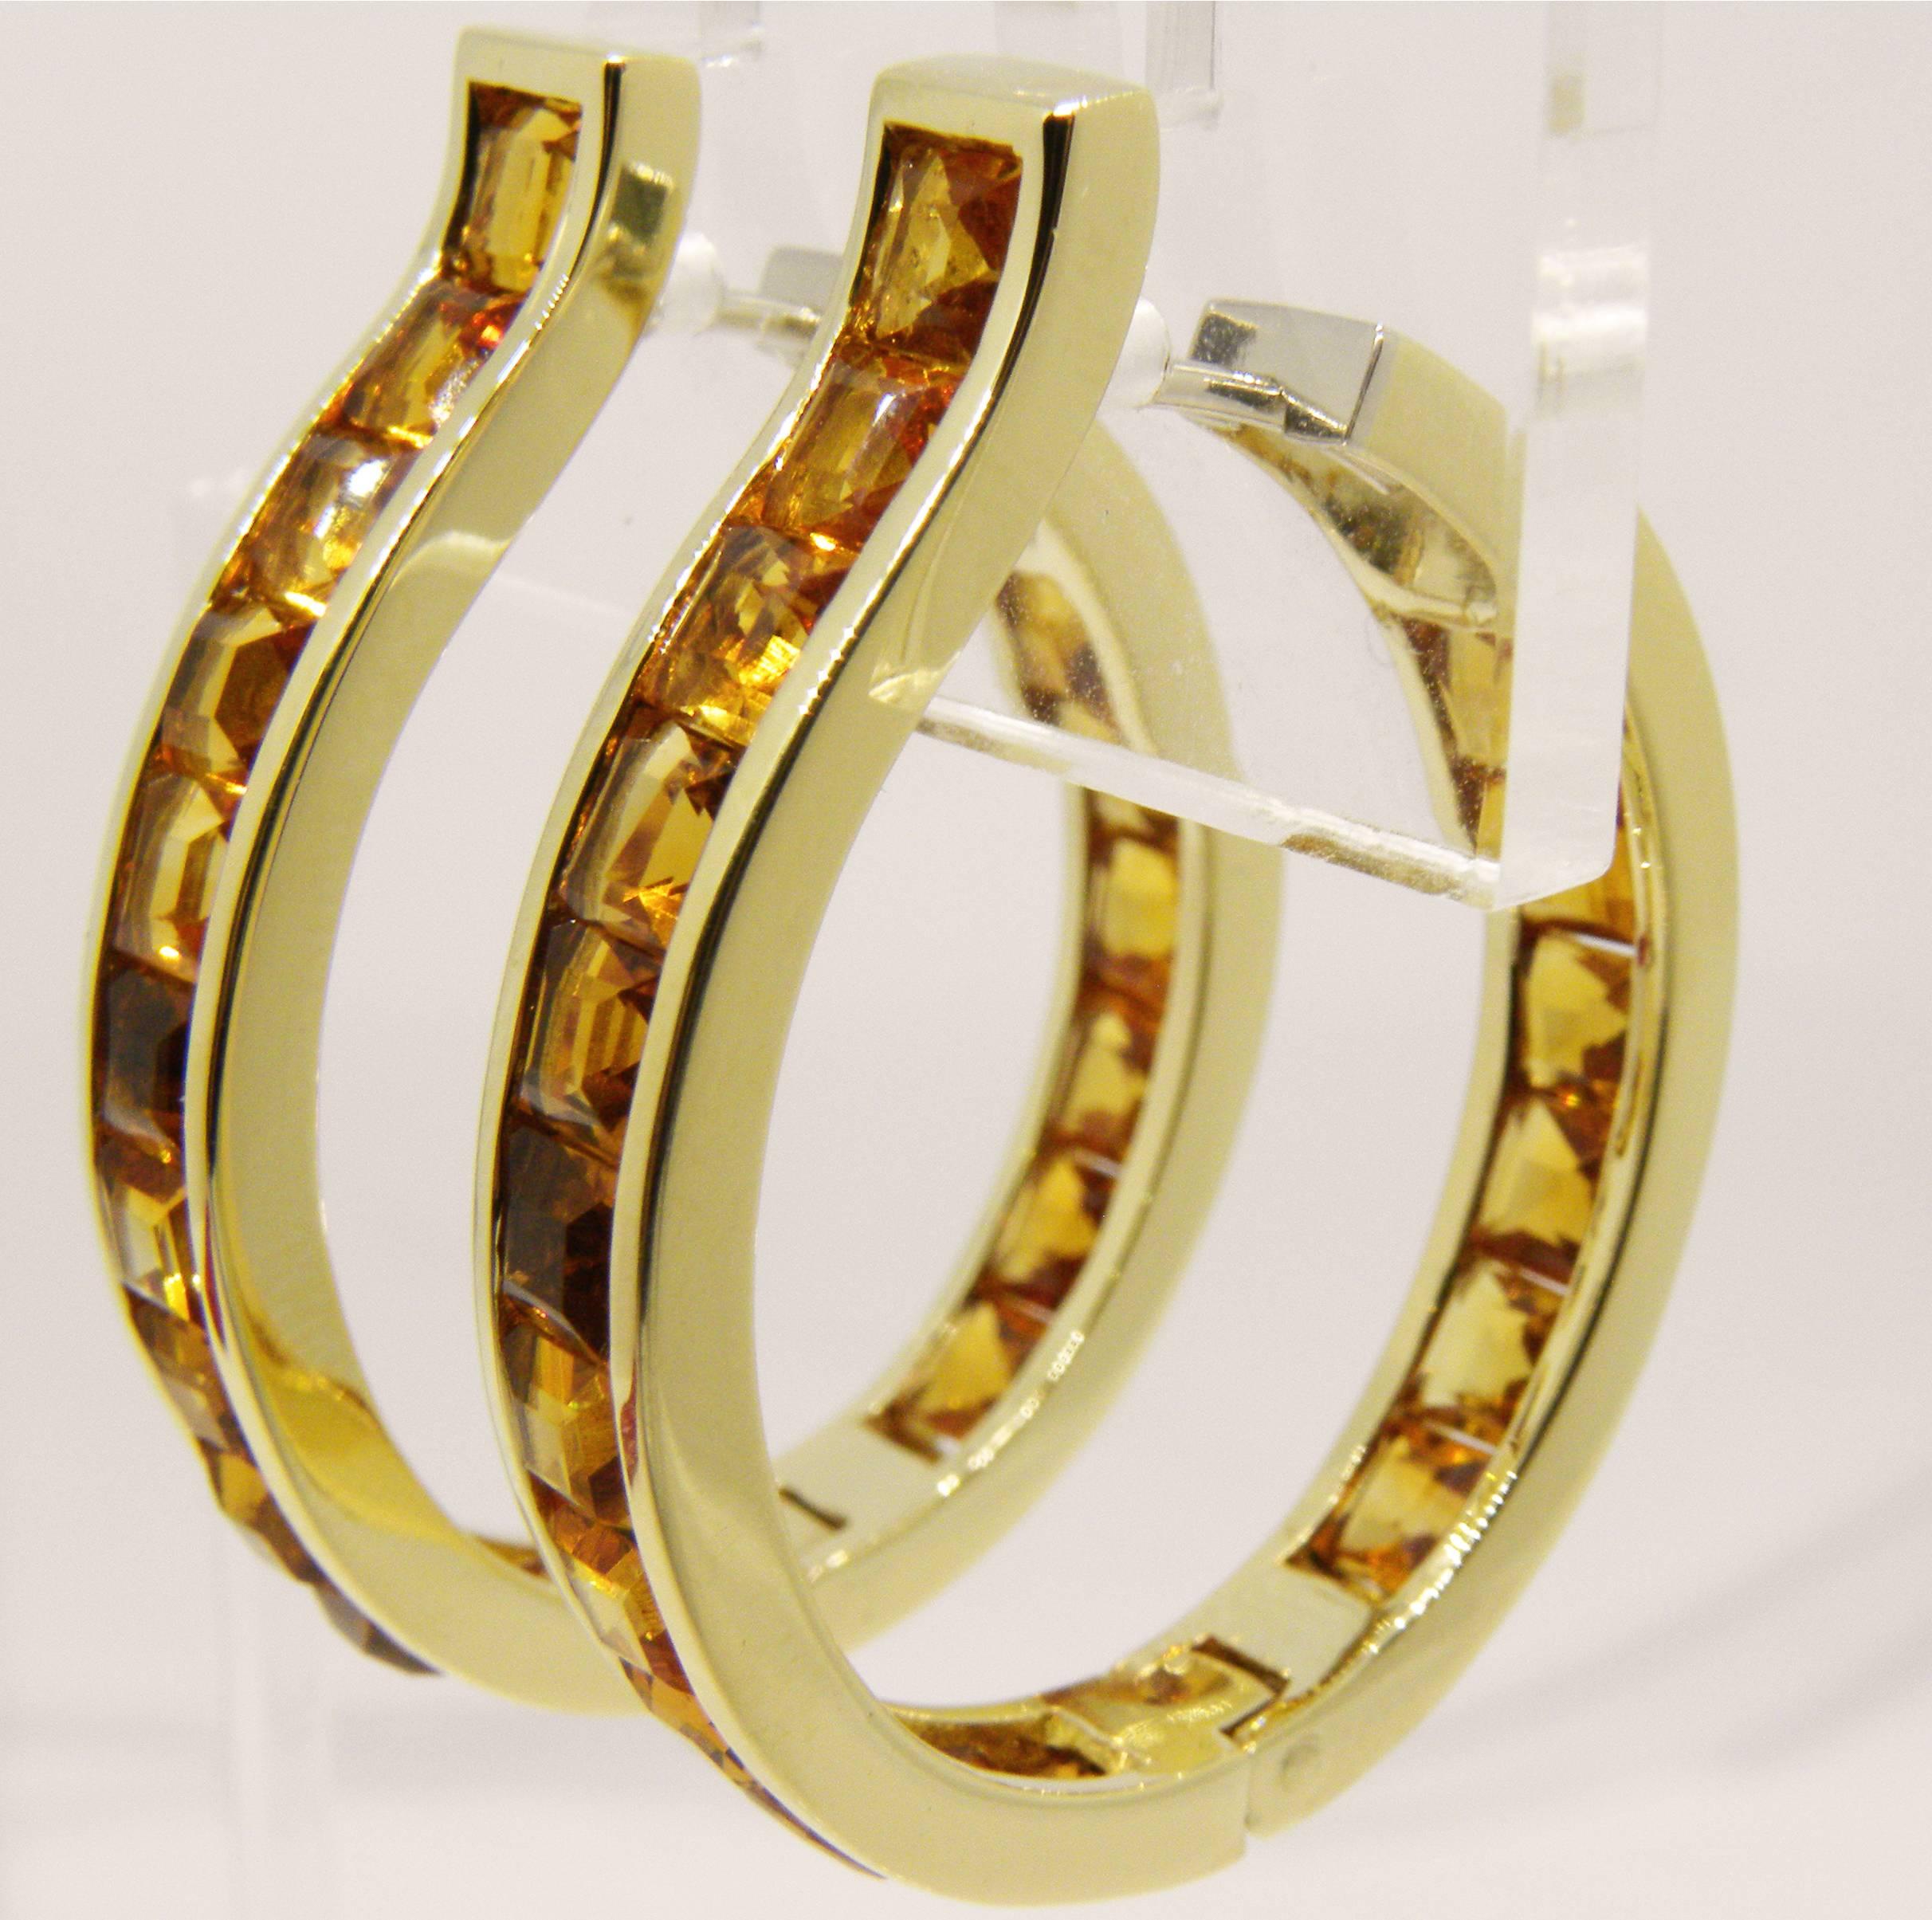 Princess Cut Berca Unique Oval Square Cut Natural Citrine 18 Carat Yellow Gold Hoop Earrings For Sale